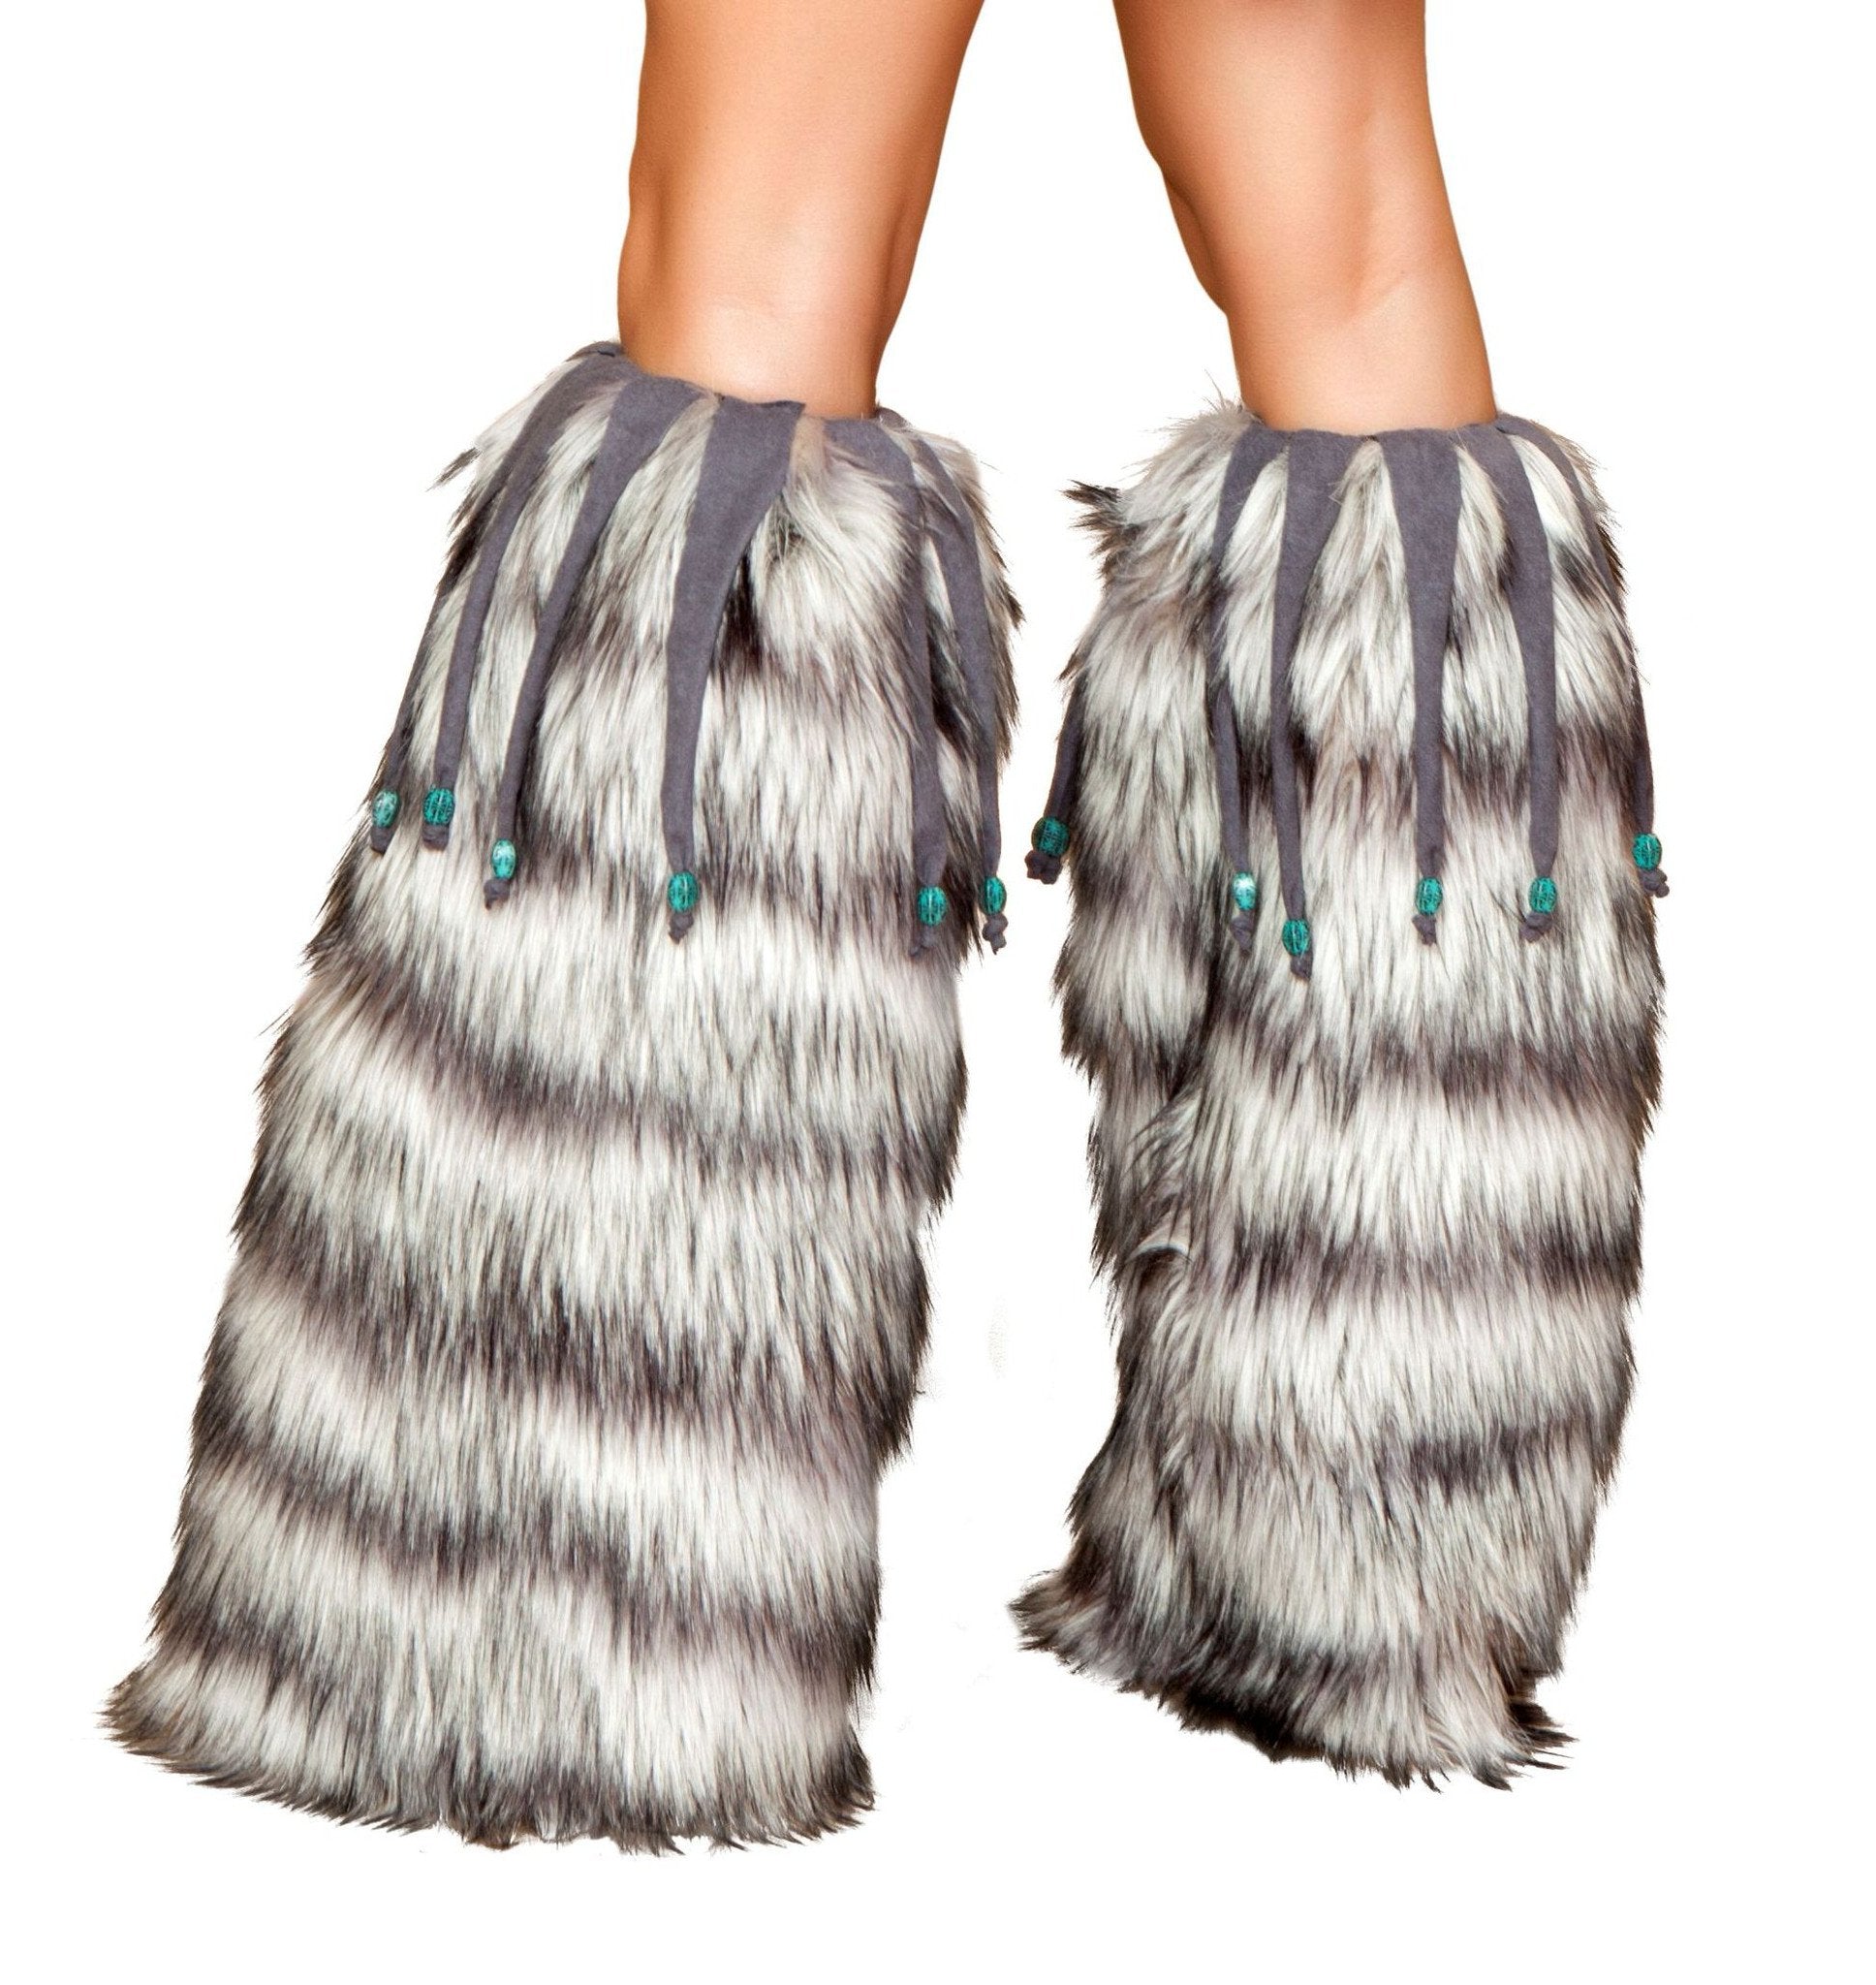 Pair of Fur Leg Warmers with Fringe and Bead Details